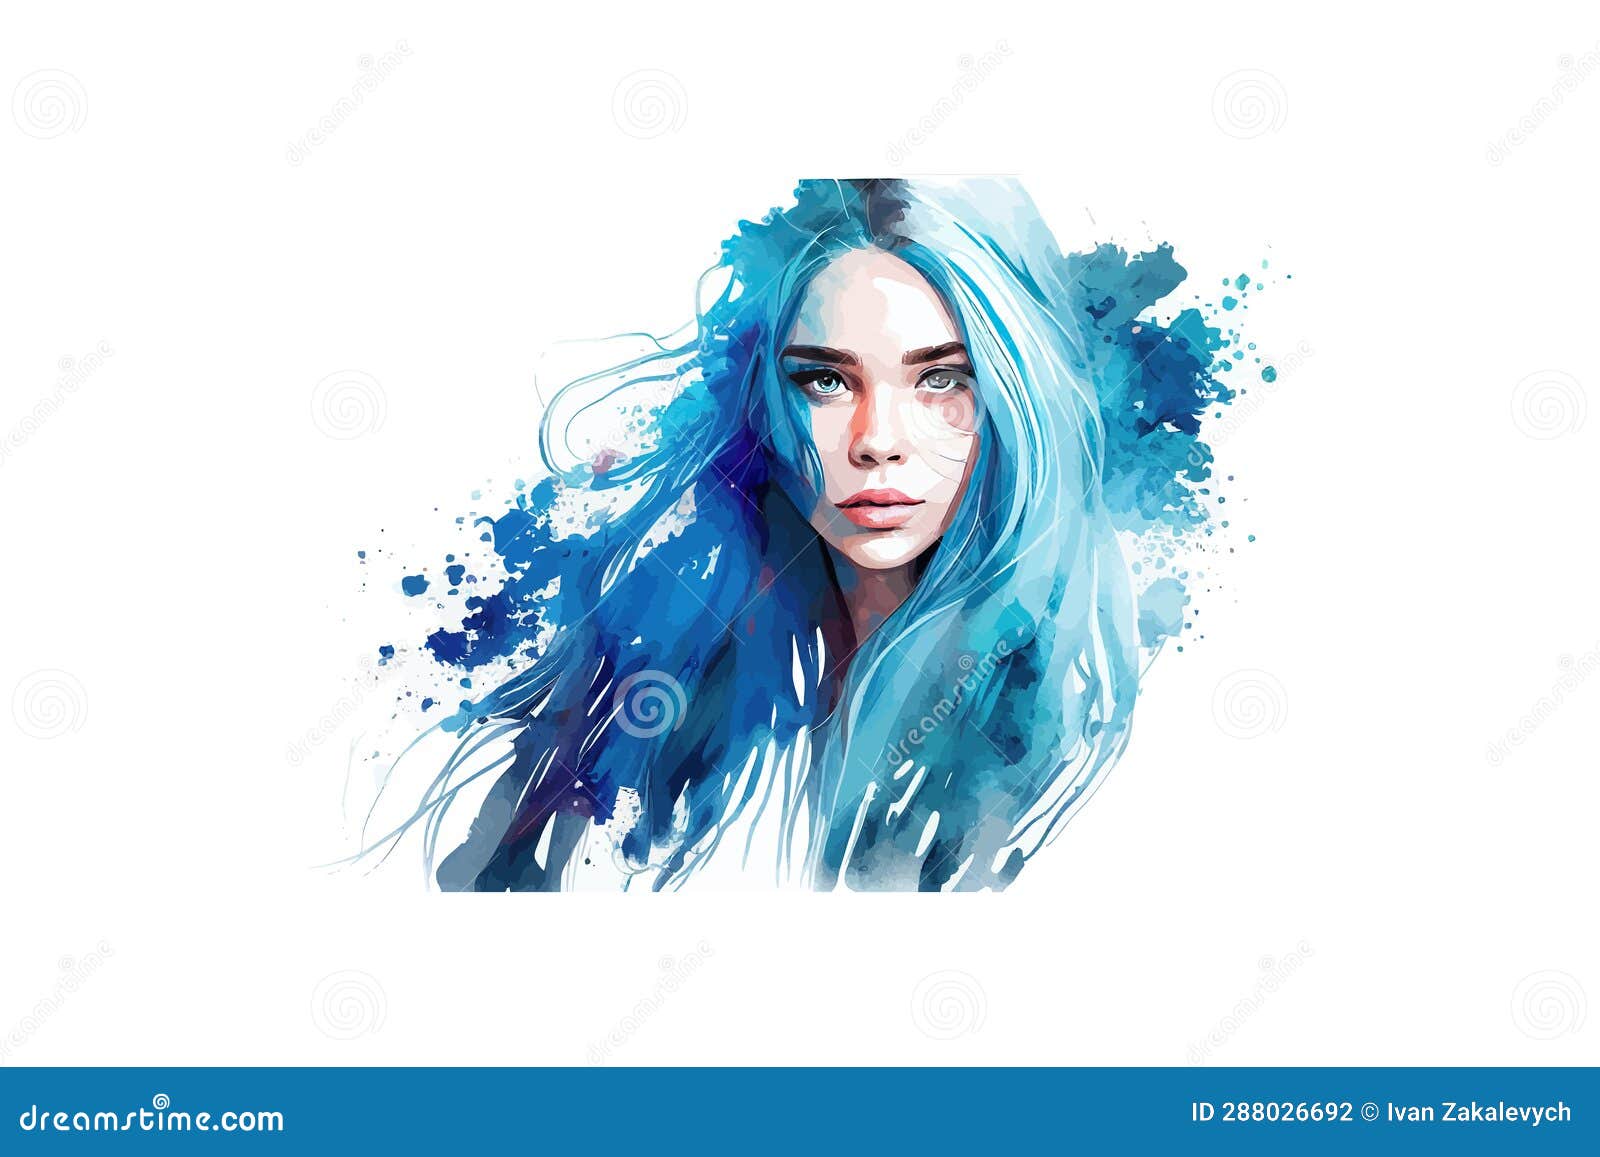 2. "Cute girl with blue hair sketch" - wide 10